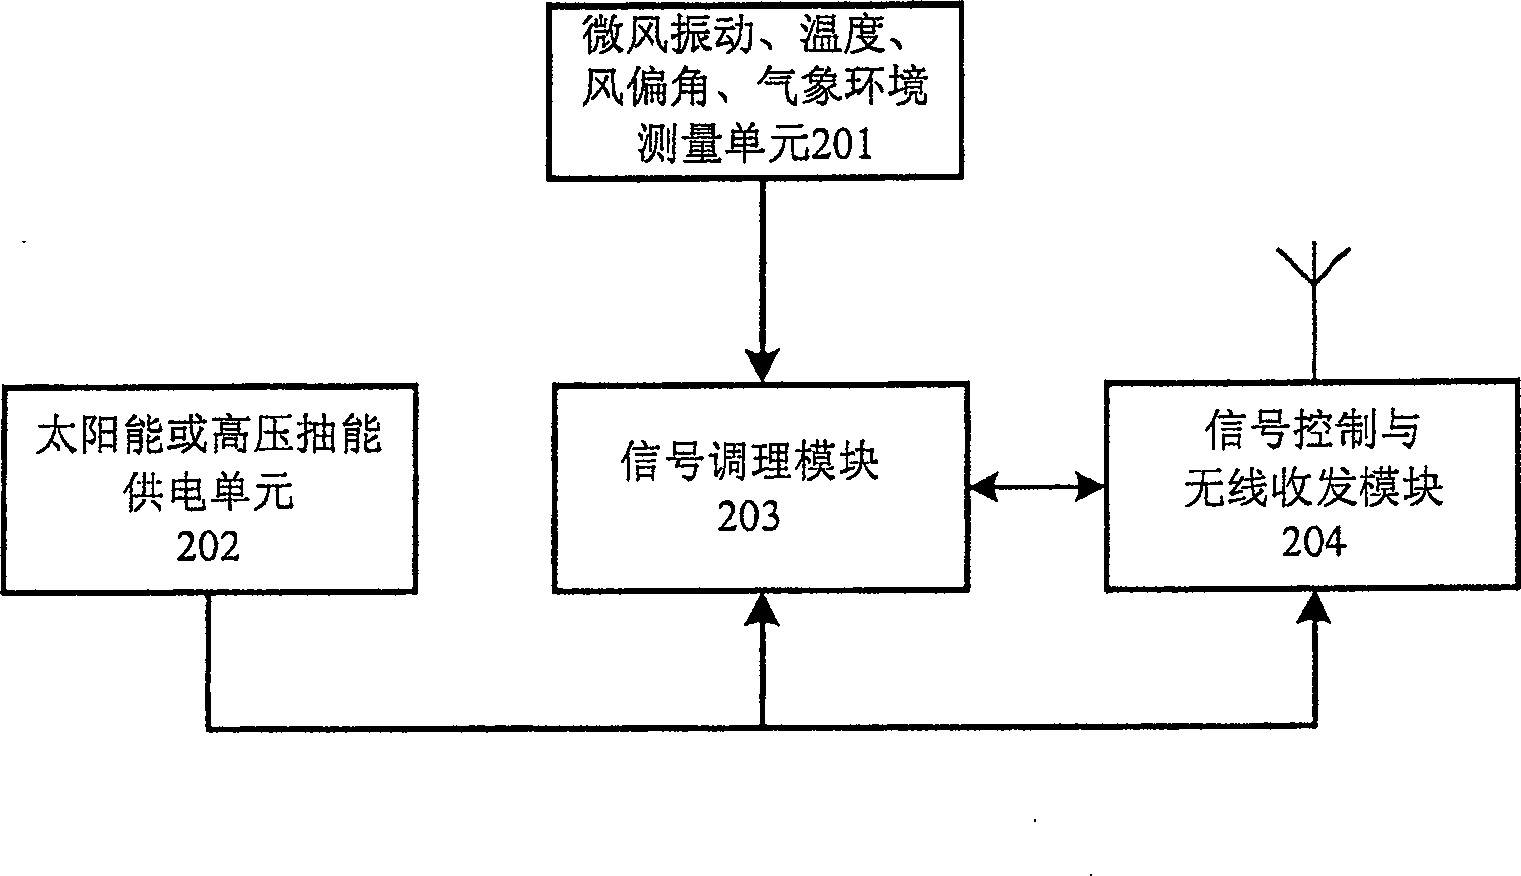 System and method for detecting online of built on stilts power transmission sequence